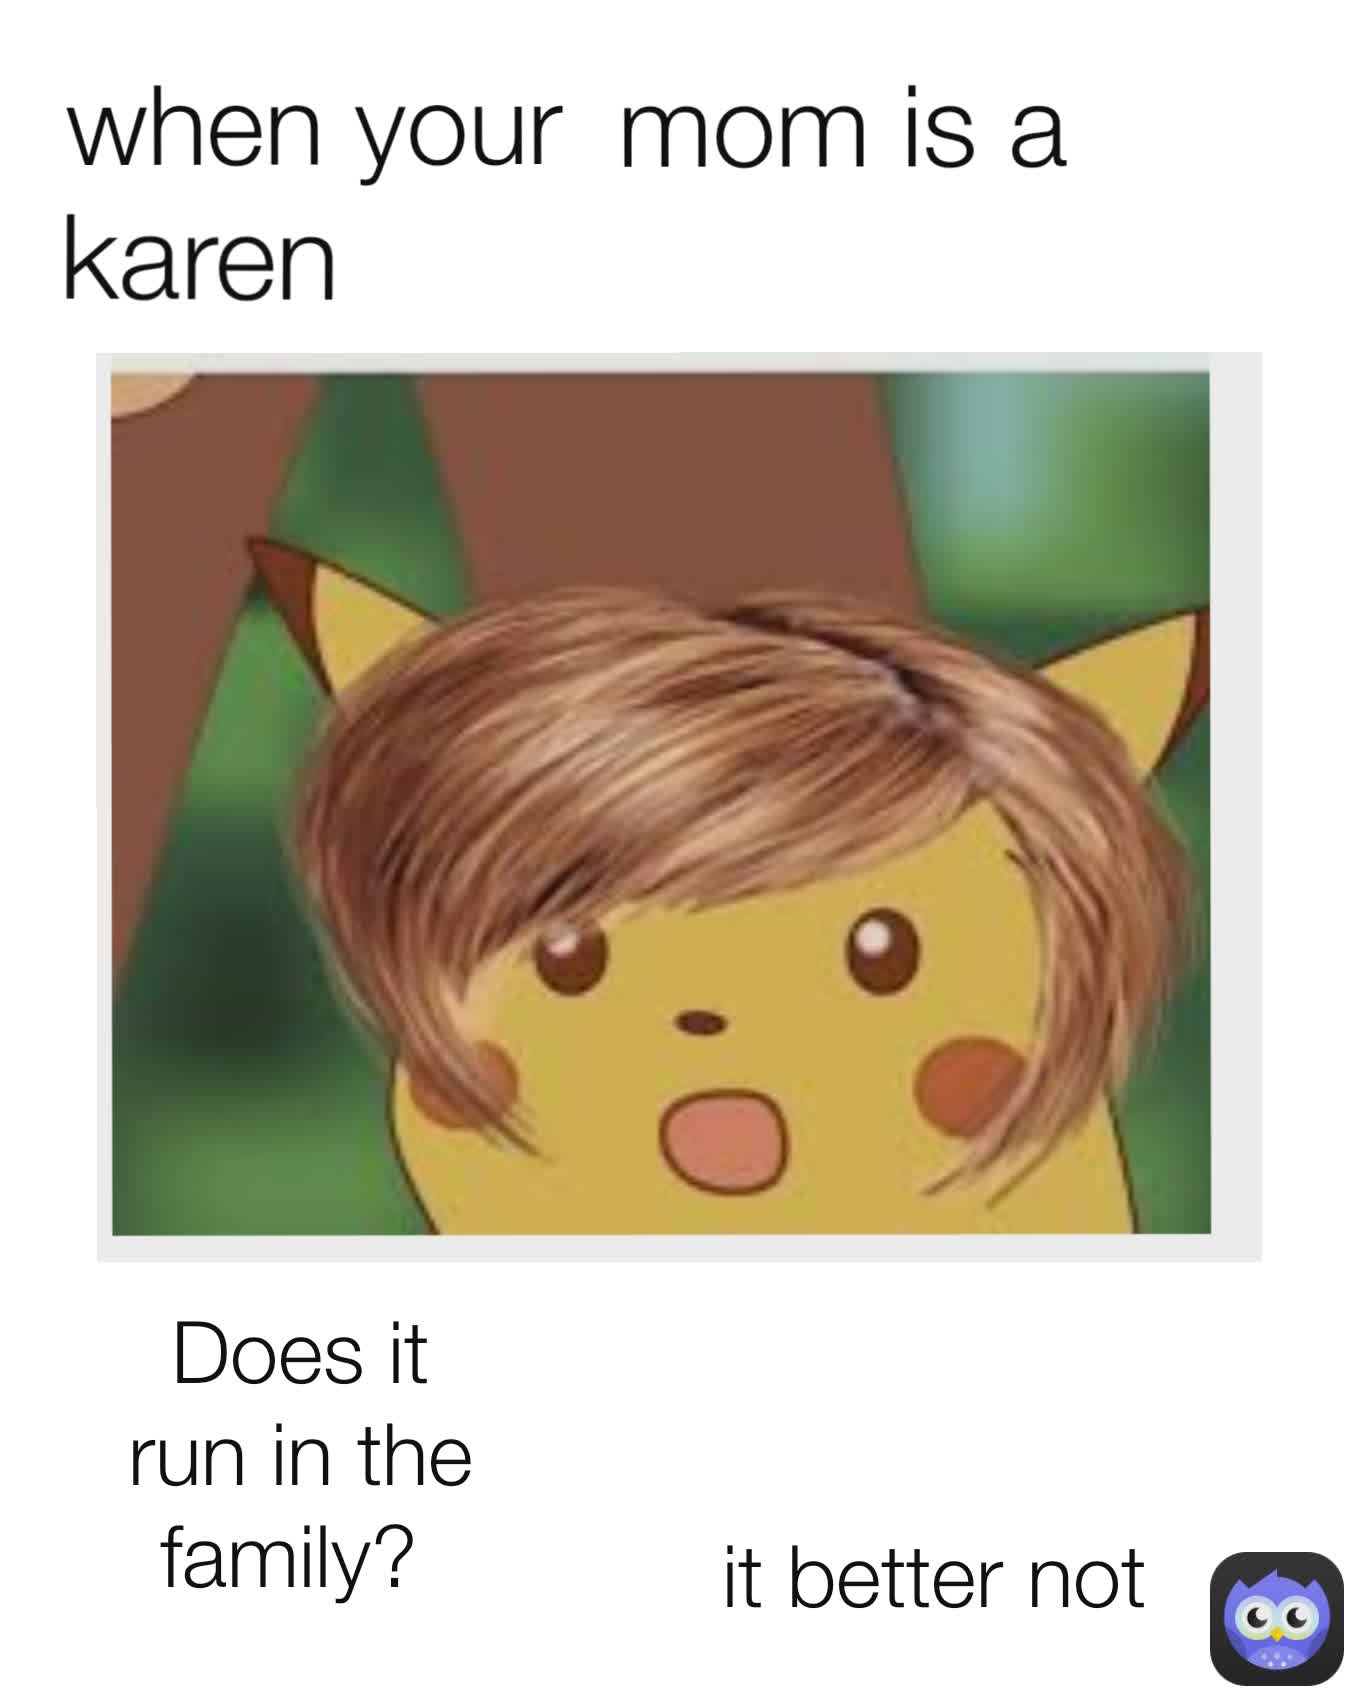 karen mom is a when your it better not Does it run in the family? 